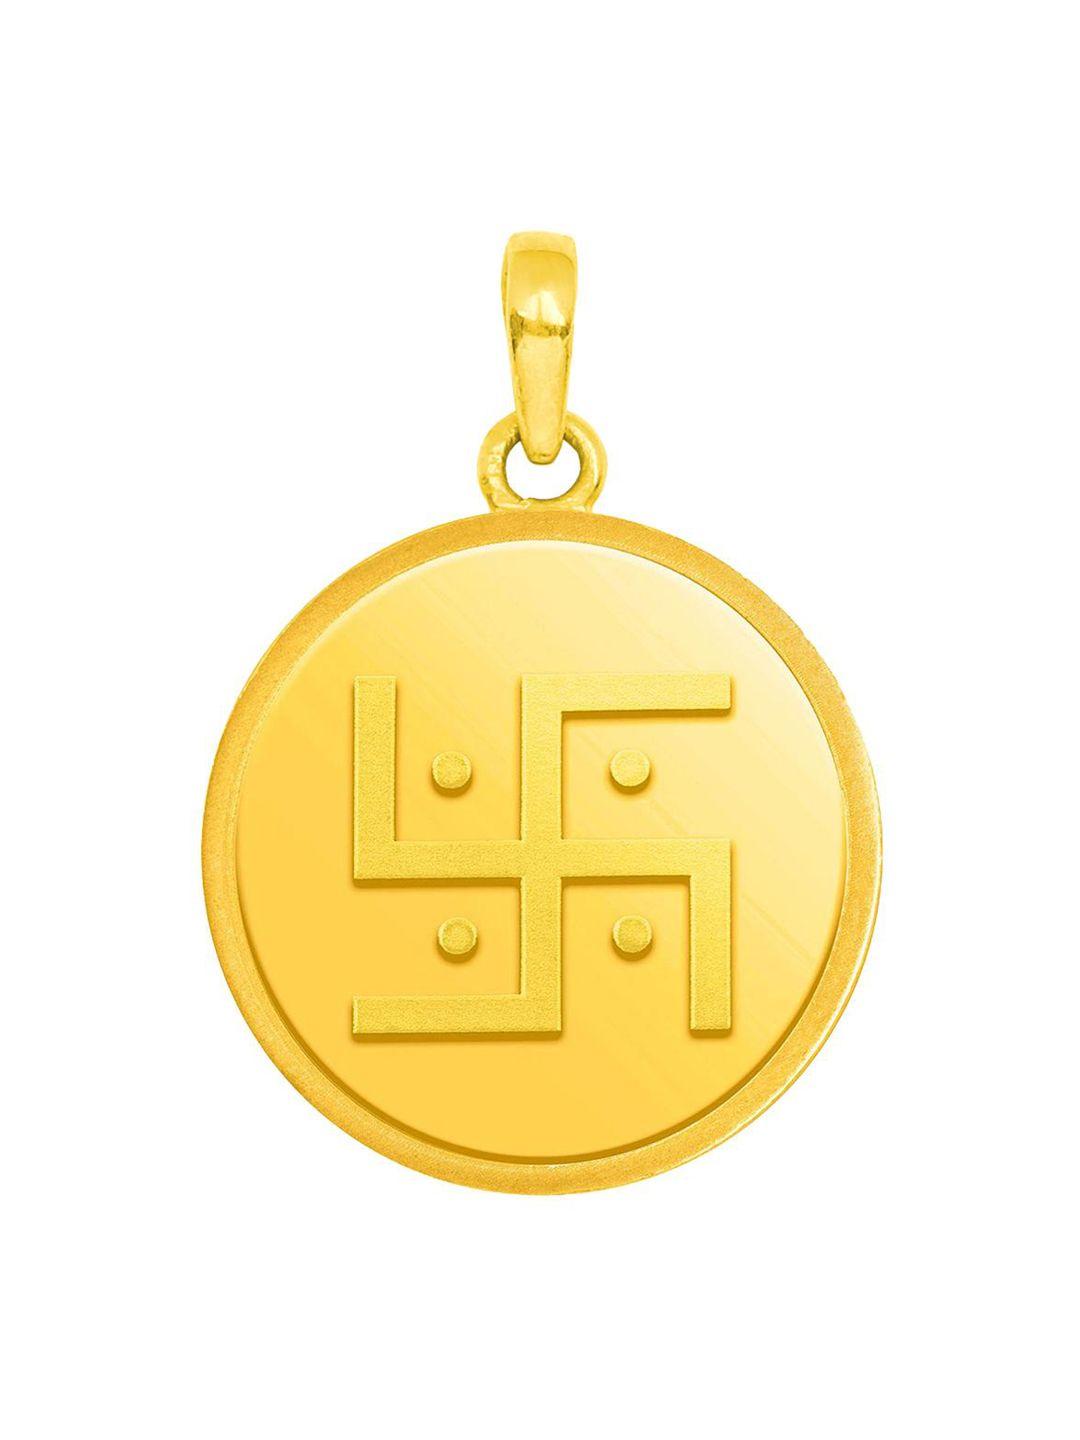 candere a kalyan jewellers company 24 kt gold swastik coin pendant- 1 g